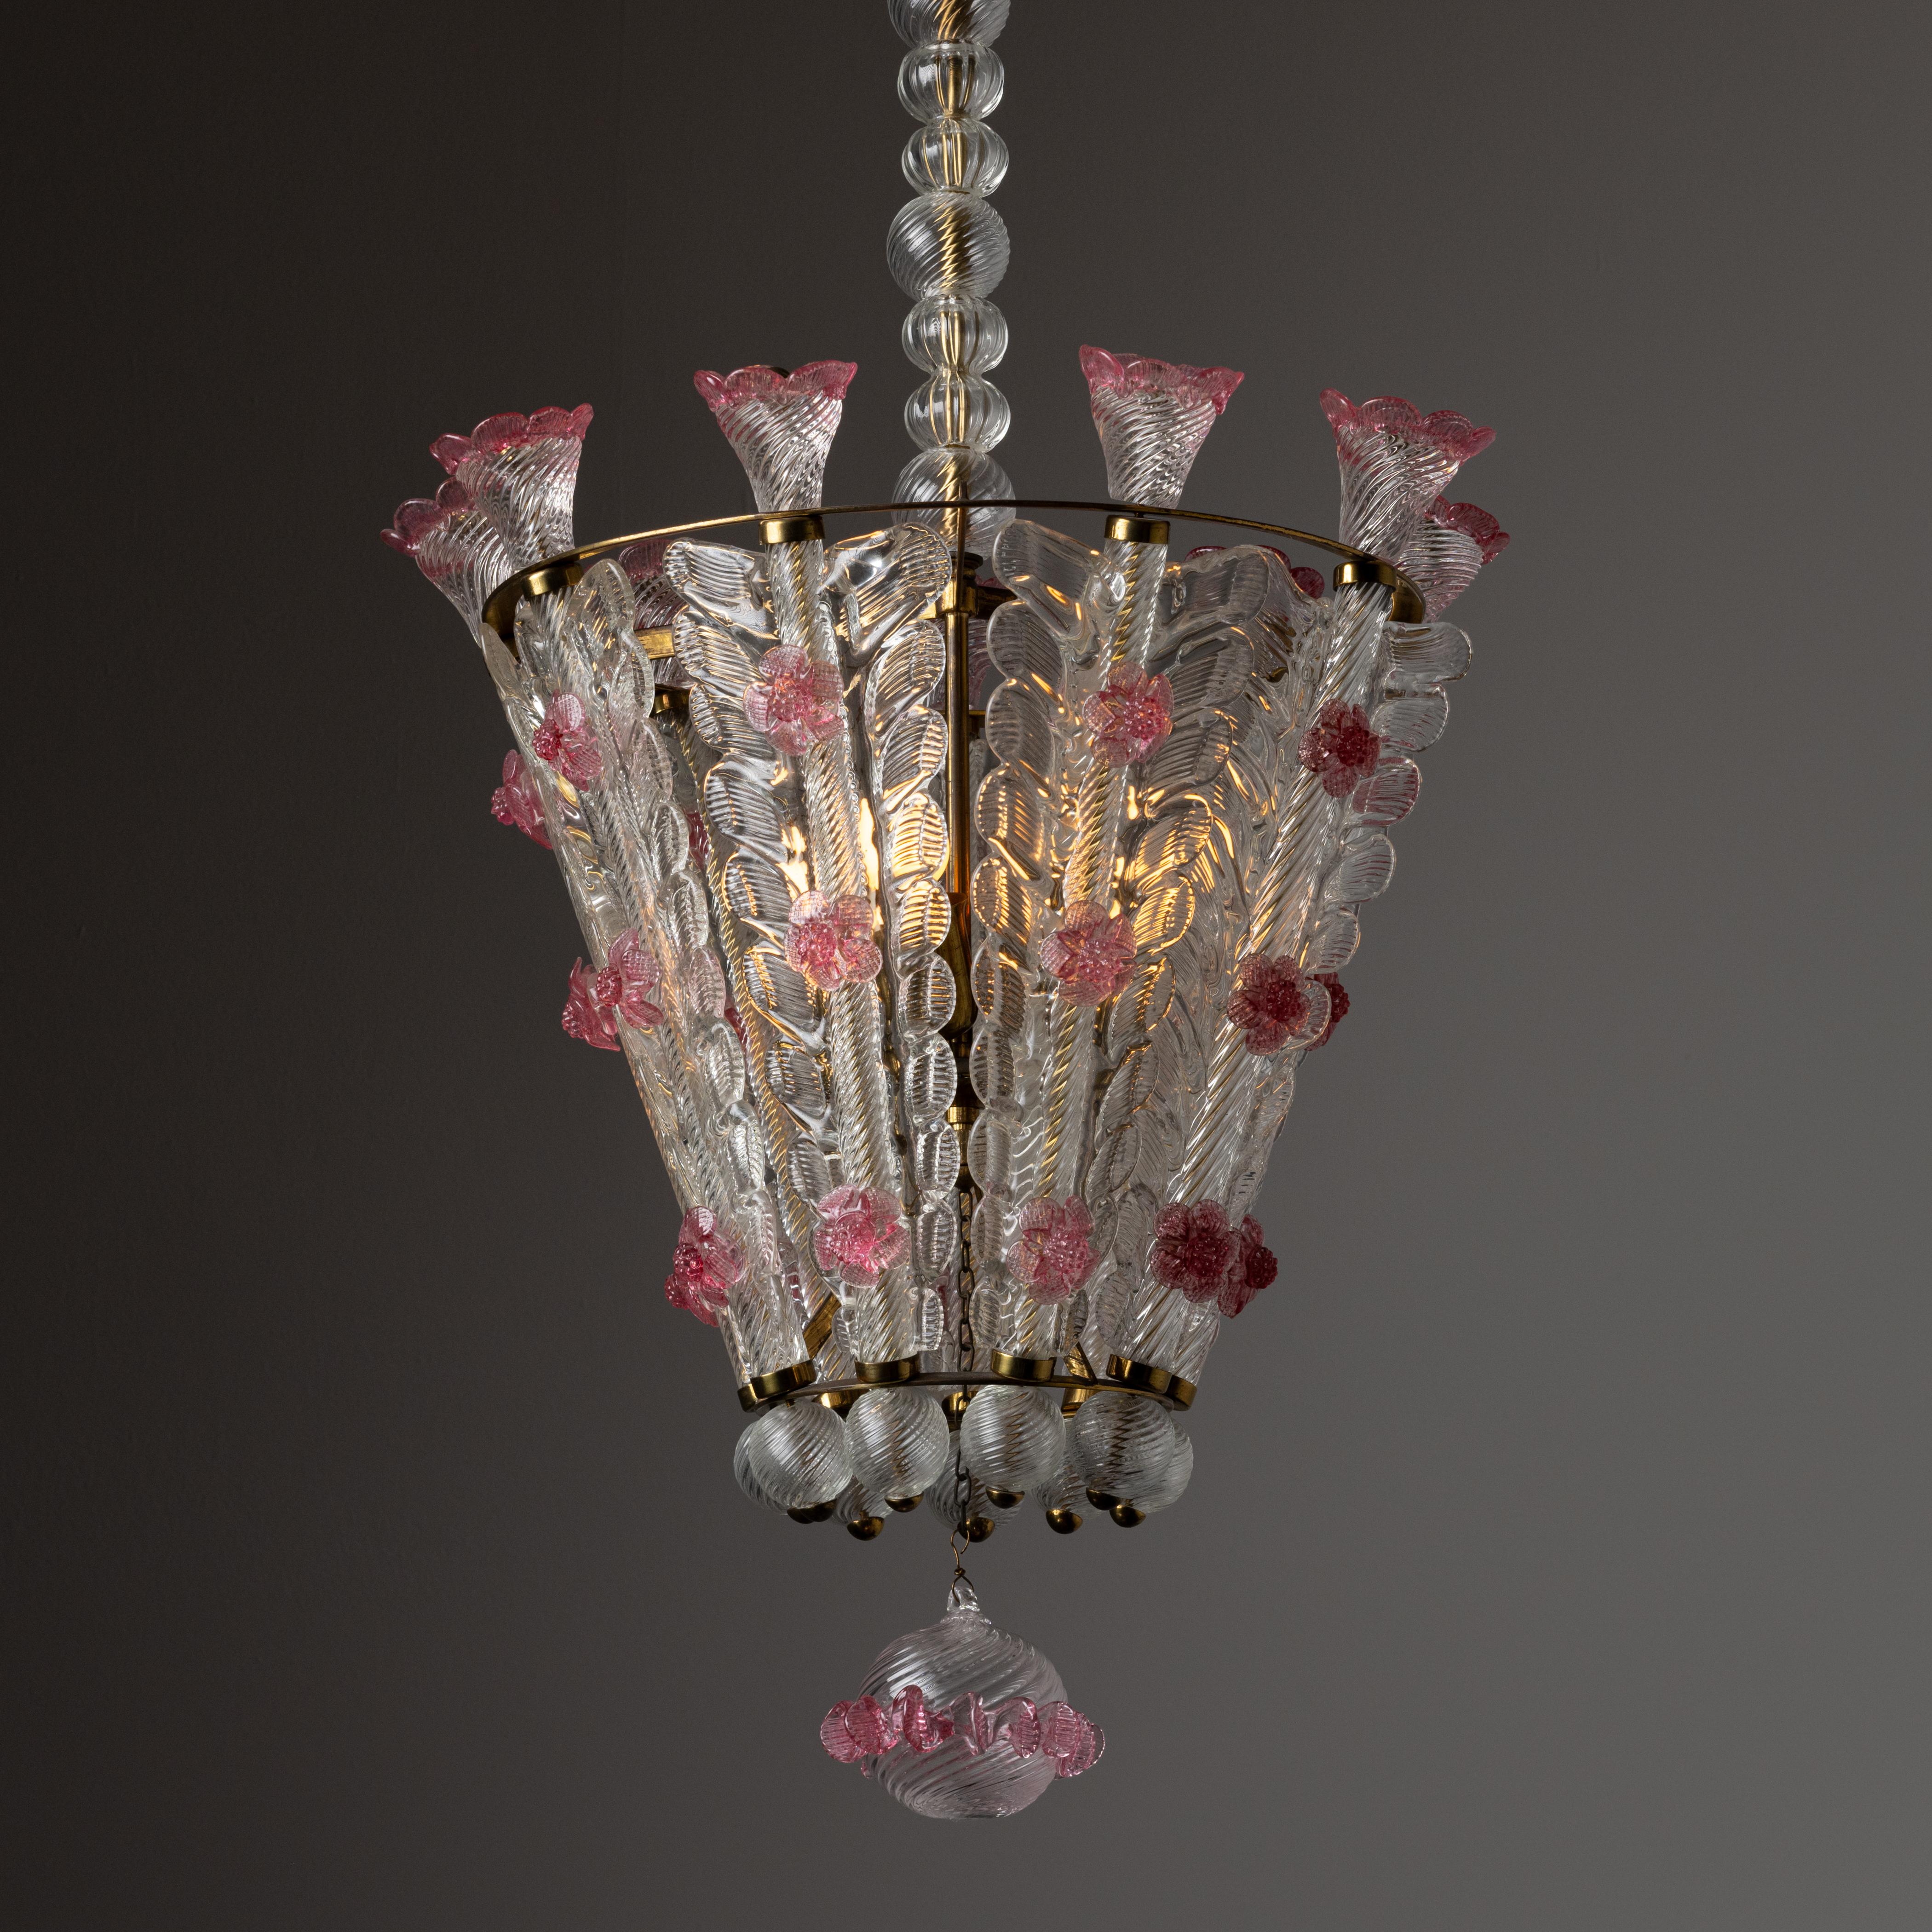 Chandelier by Tomaso Buzzi for Venini. Designed and manufactured in Italy, circa the 1940s. An extremely striking elegantly crafted chandelier comprising of multiple pressed glass in forms of stems, petals and blooming flowers running vertically